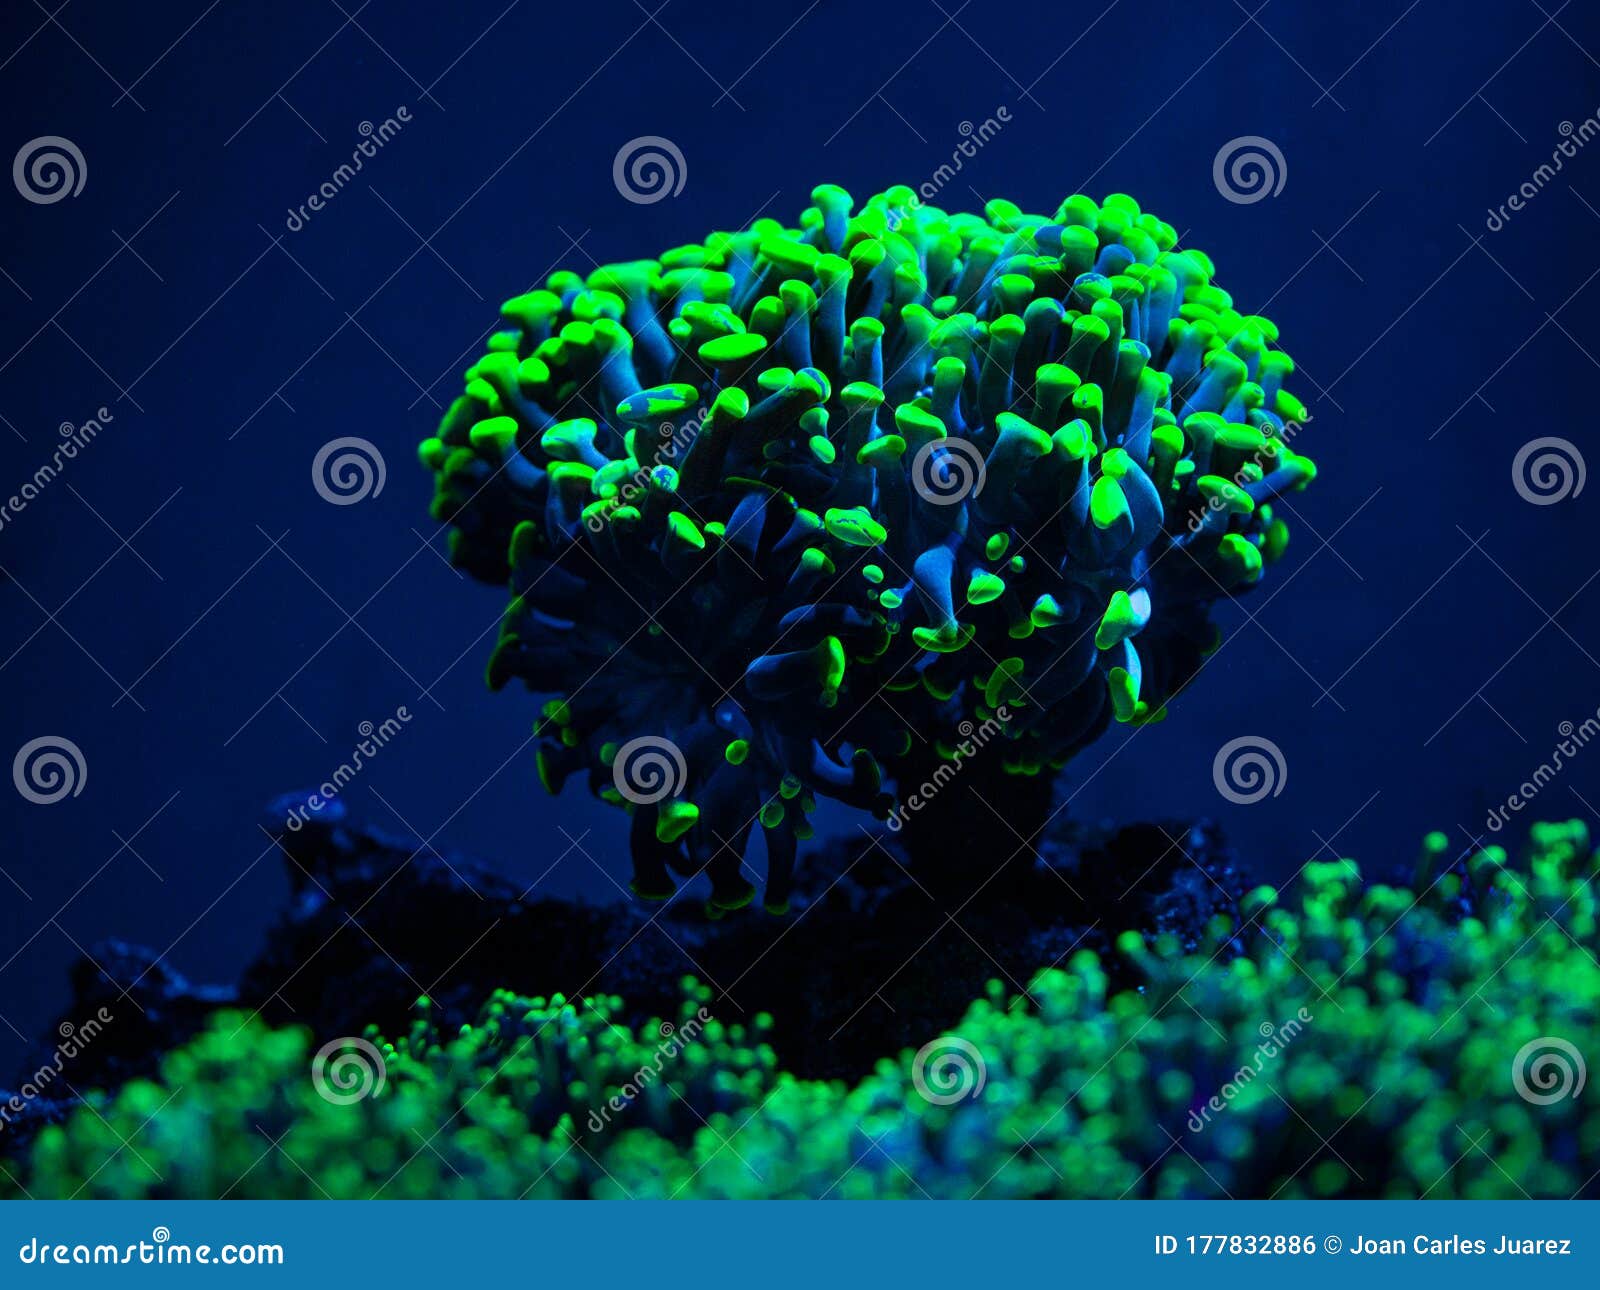 euphyllia parancora lps coral showing its green fluorescence color in a reef aquarium